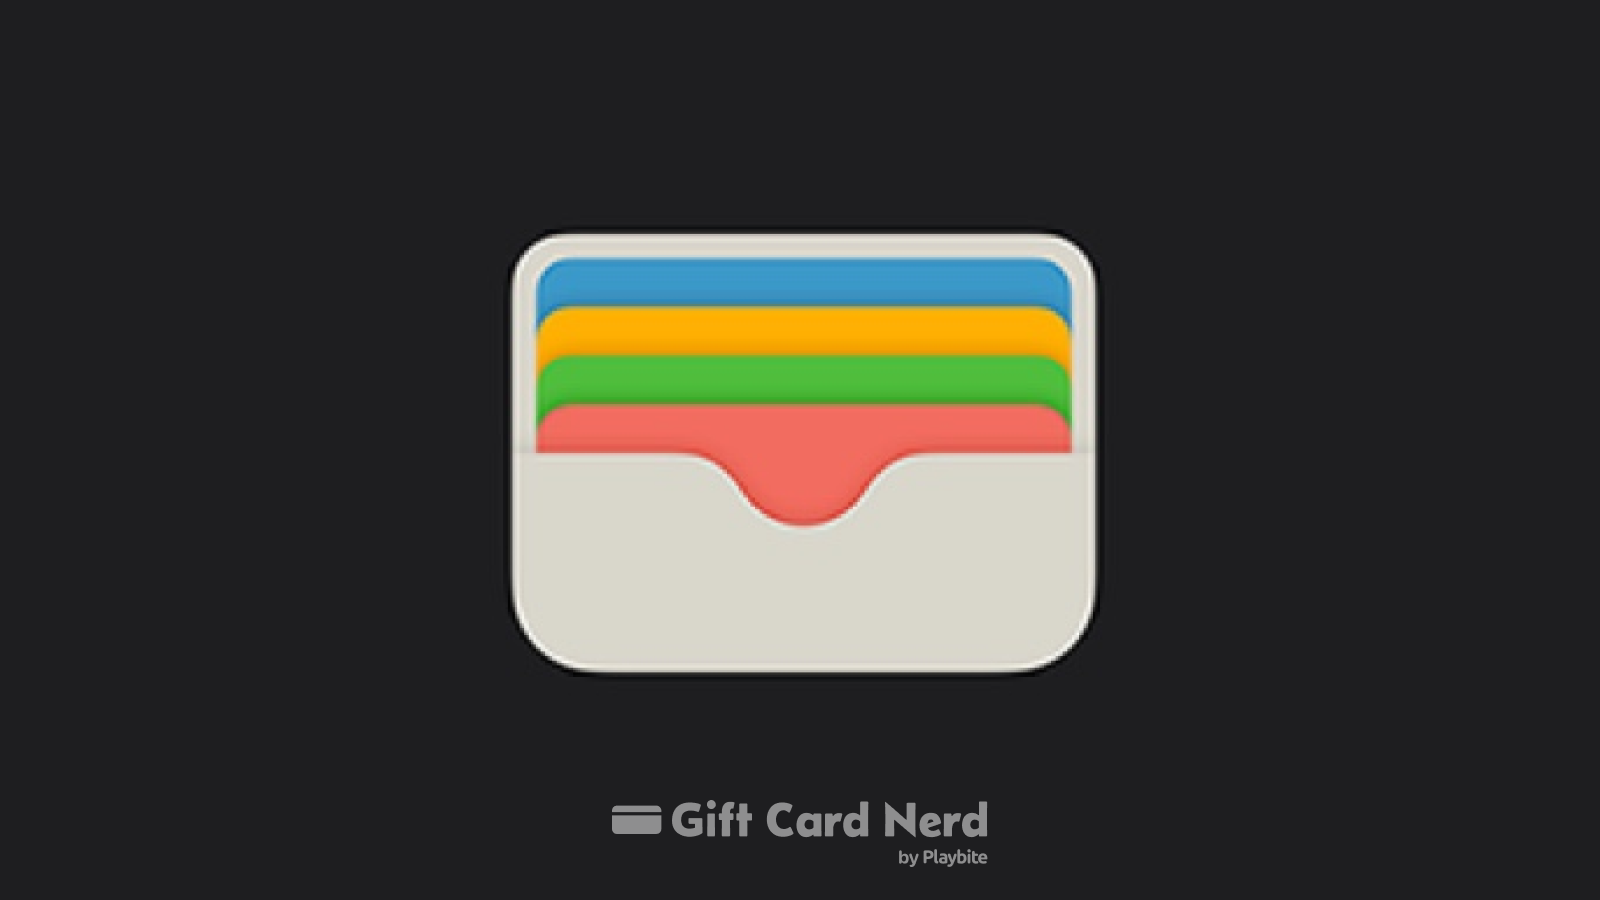 Can I Use an Apple Gift Card on Roblox?